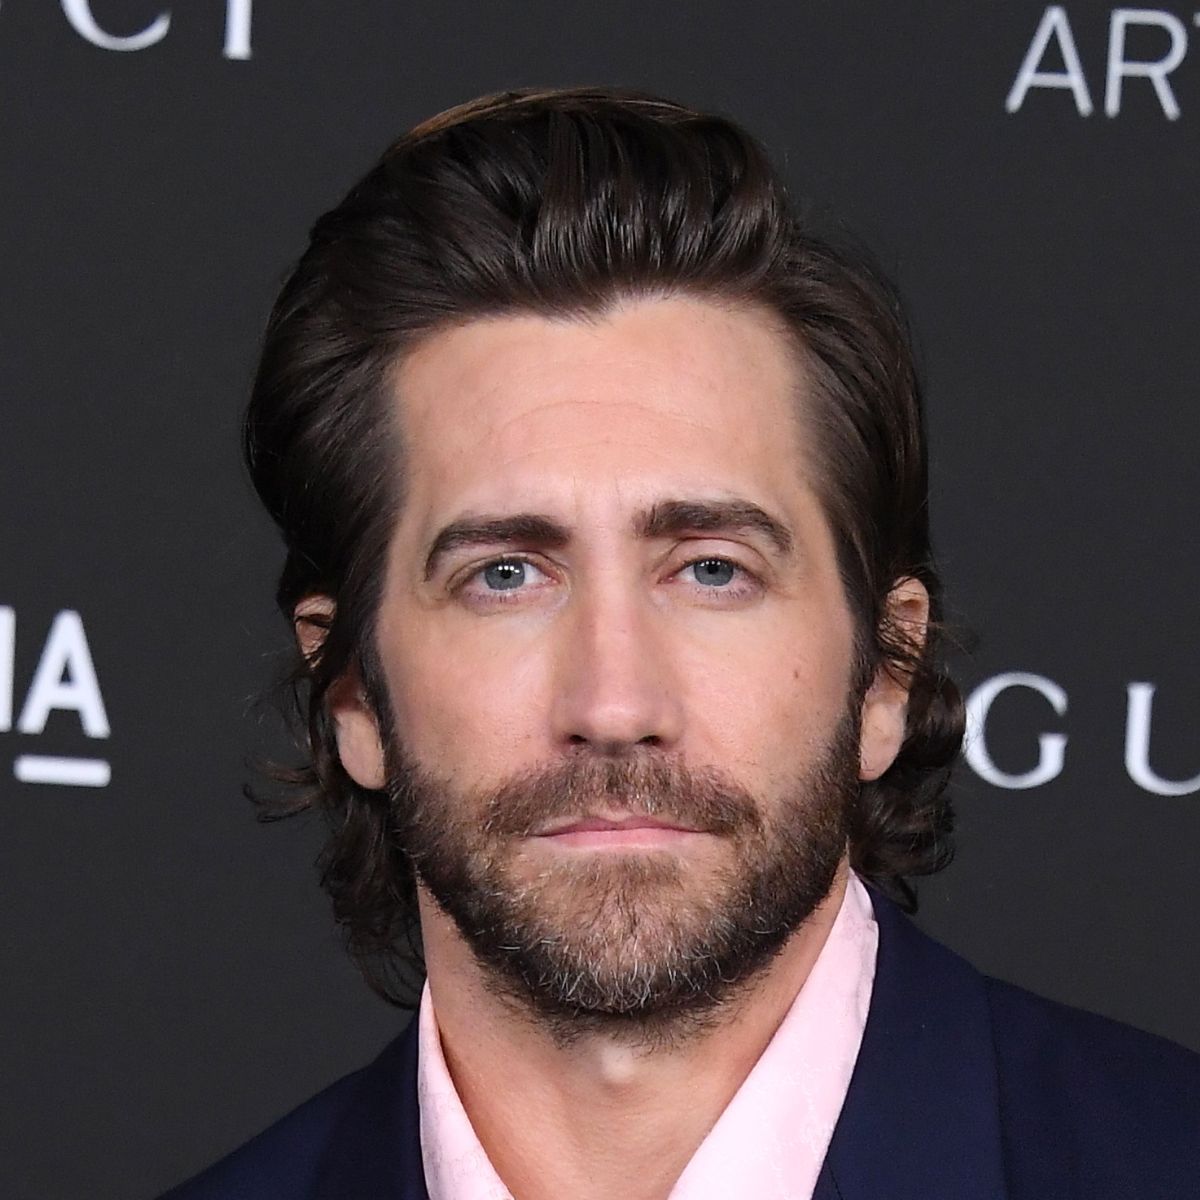 Product to get similar look as Jake Gyllenhaal? : r/Pomade